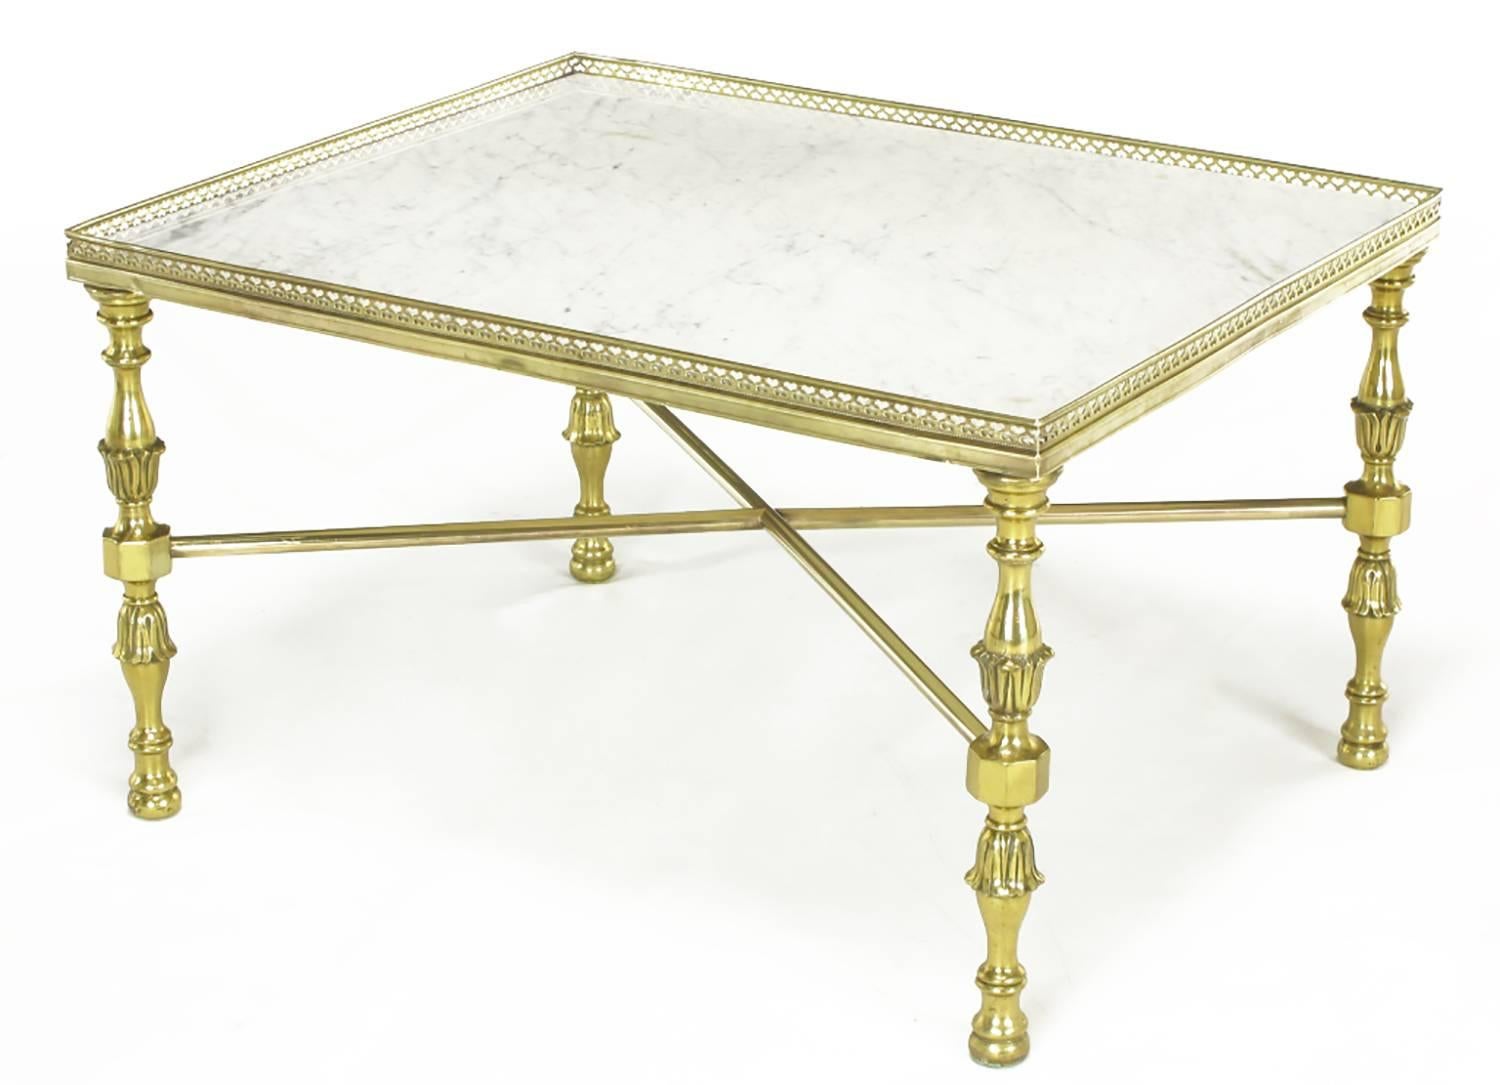 Solid brass and Carrara marble end tables with Regency styled acanthus leaf detailed baluster style legs and X stretcher supports. Pierced gallery top surround. Most probably a custom design of Italian origin that would make a great two-piece coffee